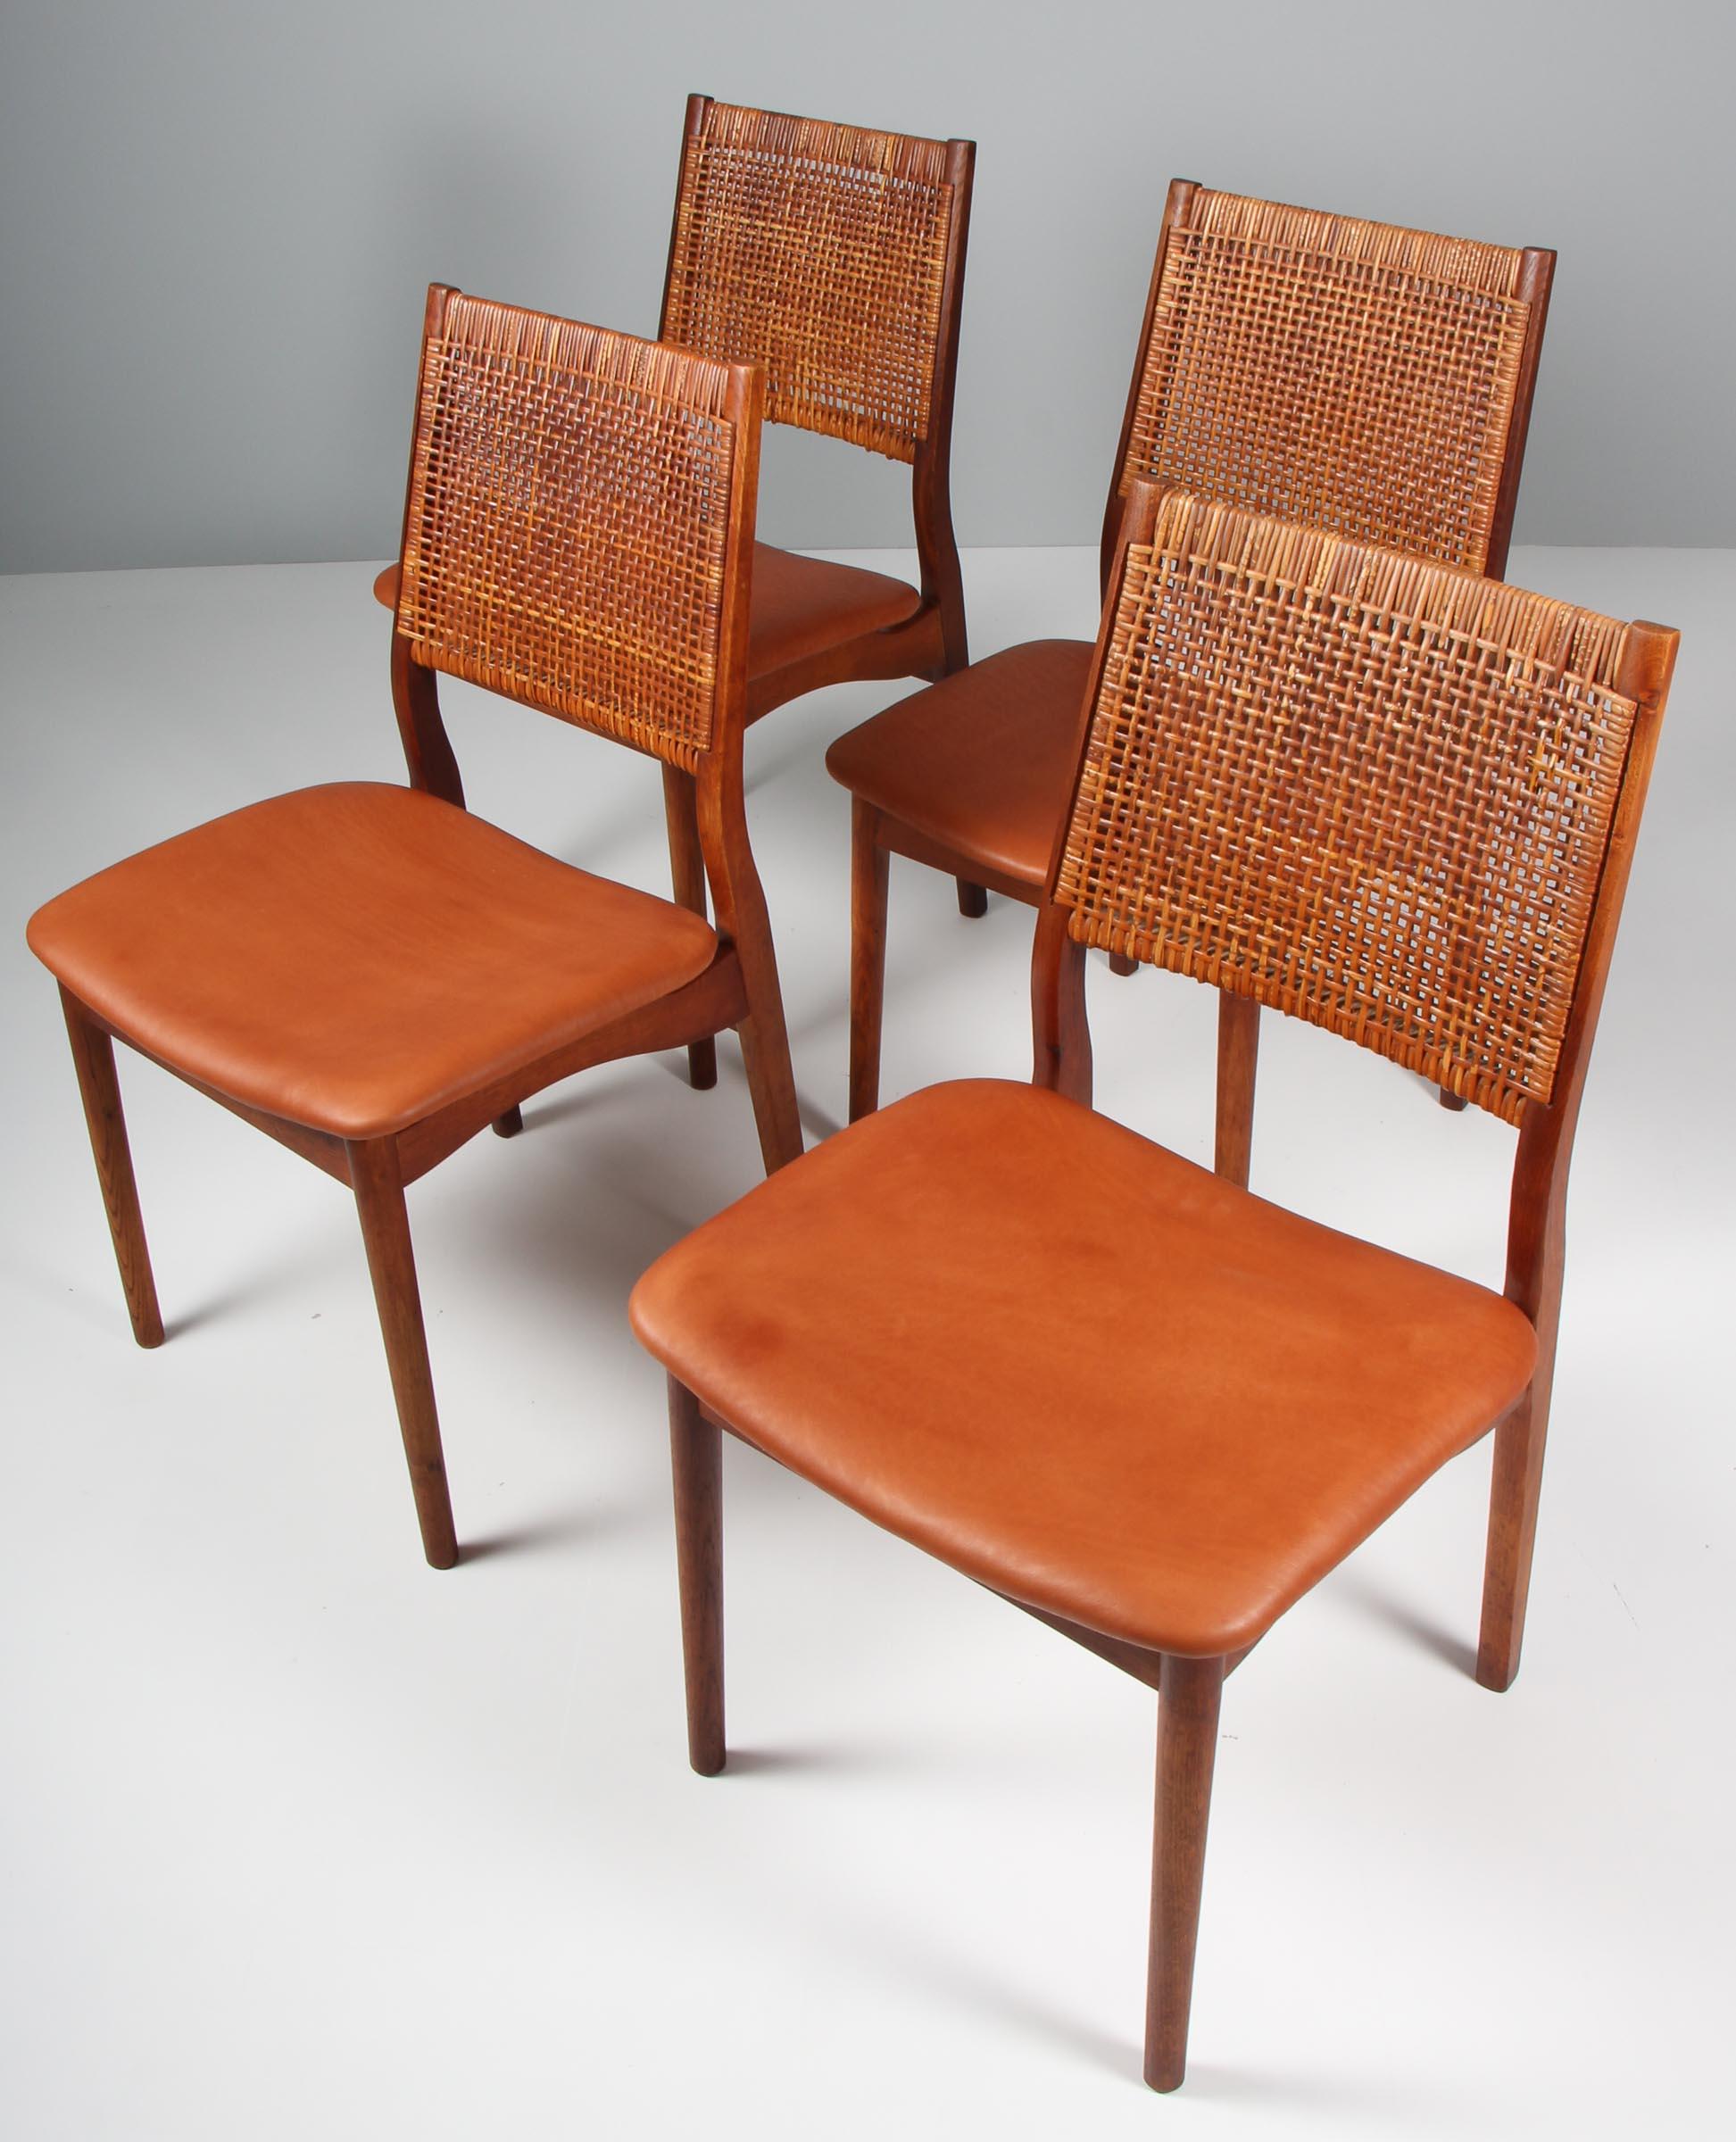 Helge Sibast six chairs with frame of solid patinated oak

New upholstered with anilin leather.